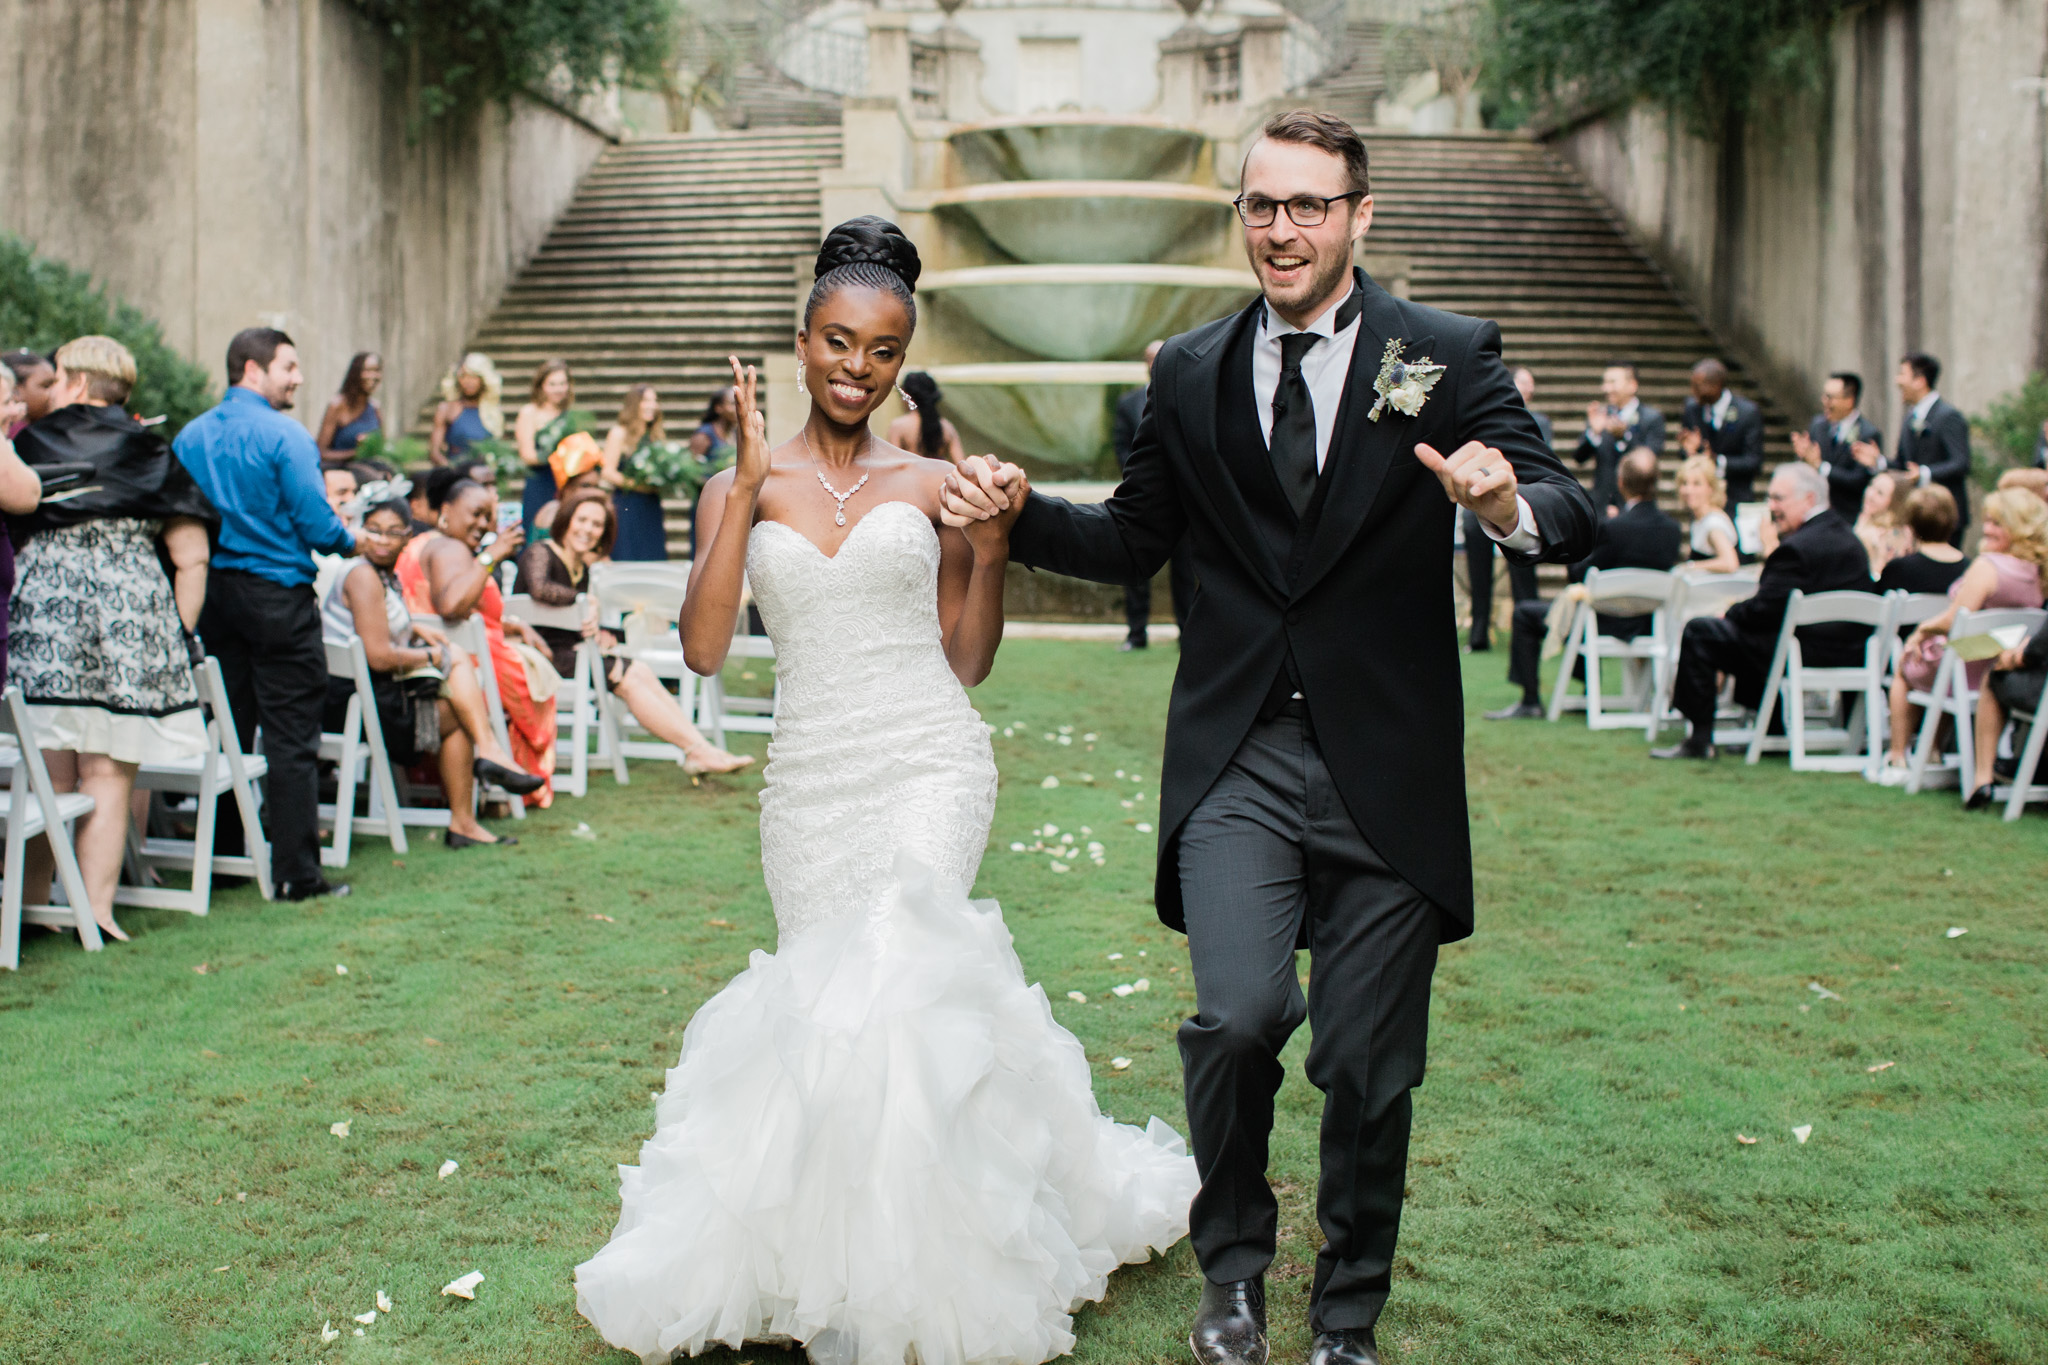 Rebecca Cerasani captures this joyful Swan House bride and groom as the leave husband and wife.